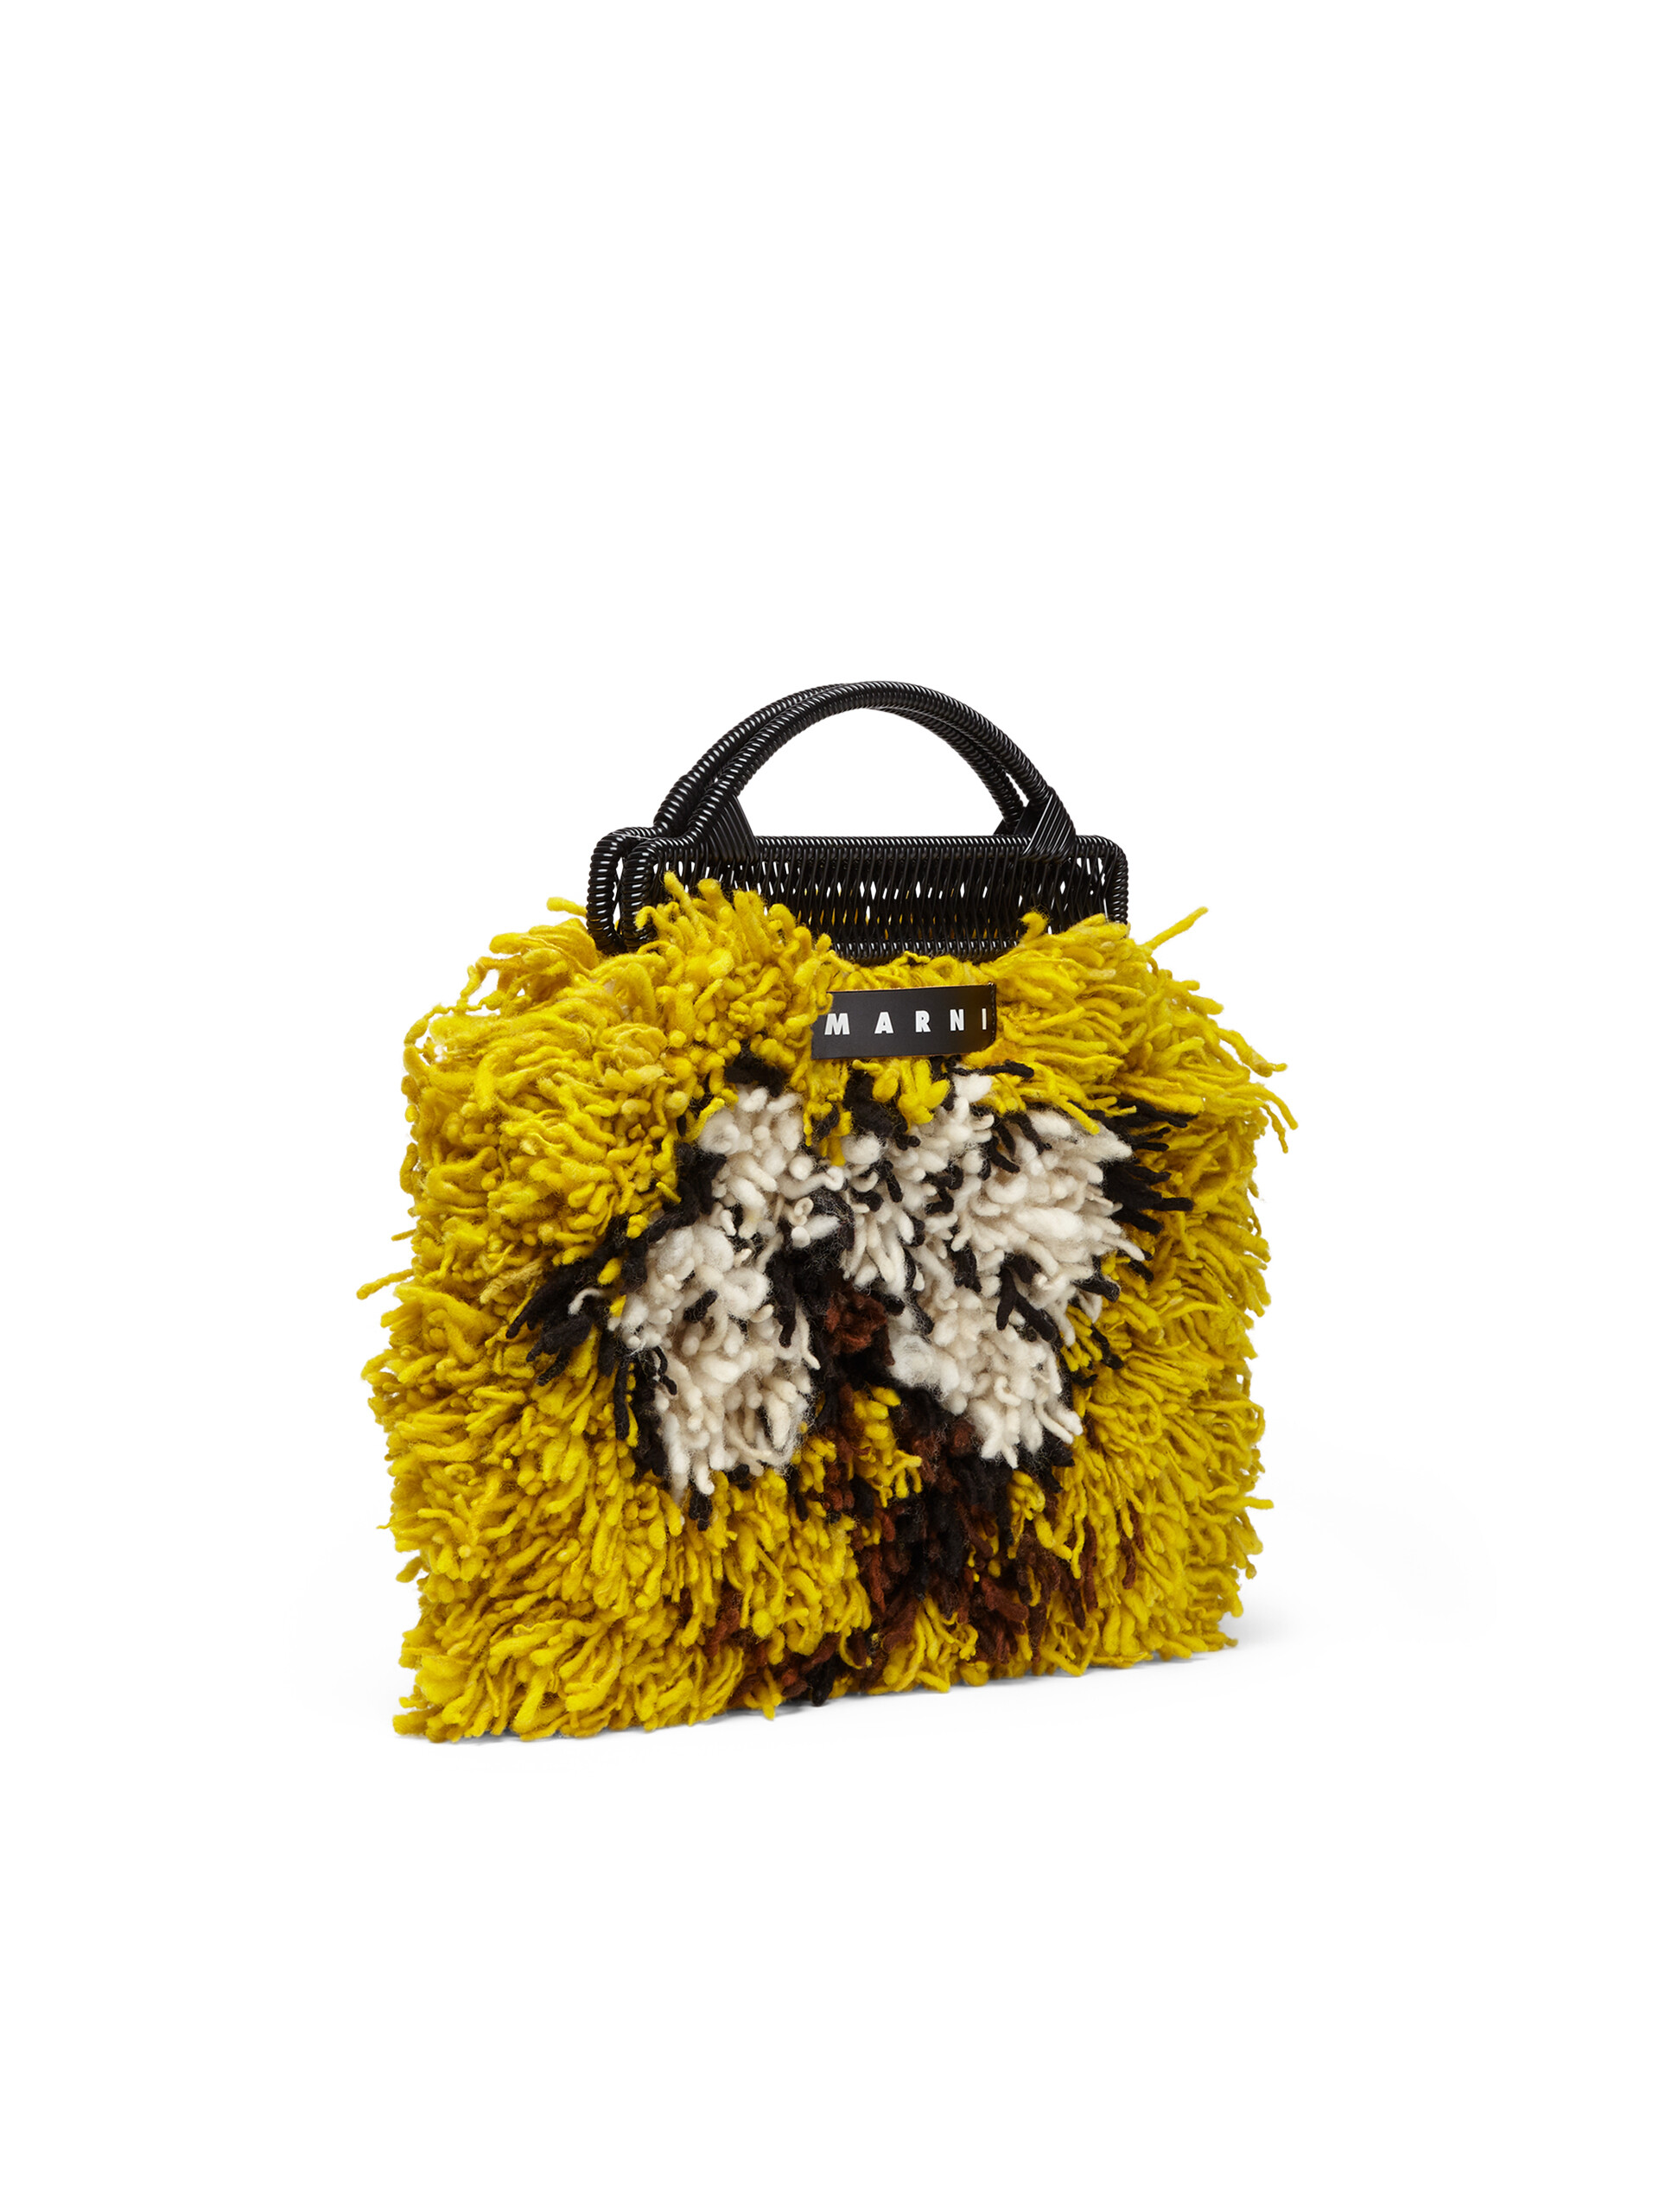 MARNI MARKET multicoloured frame bag in yellow brown and white long wool - Furniture - Image 2